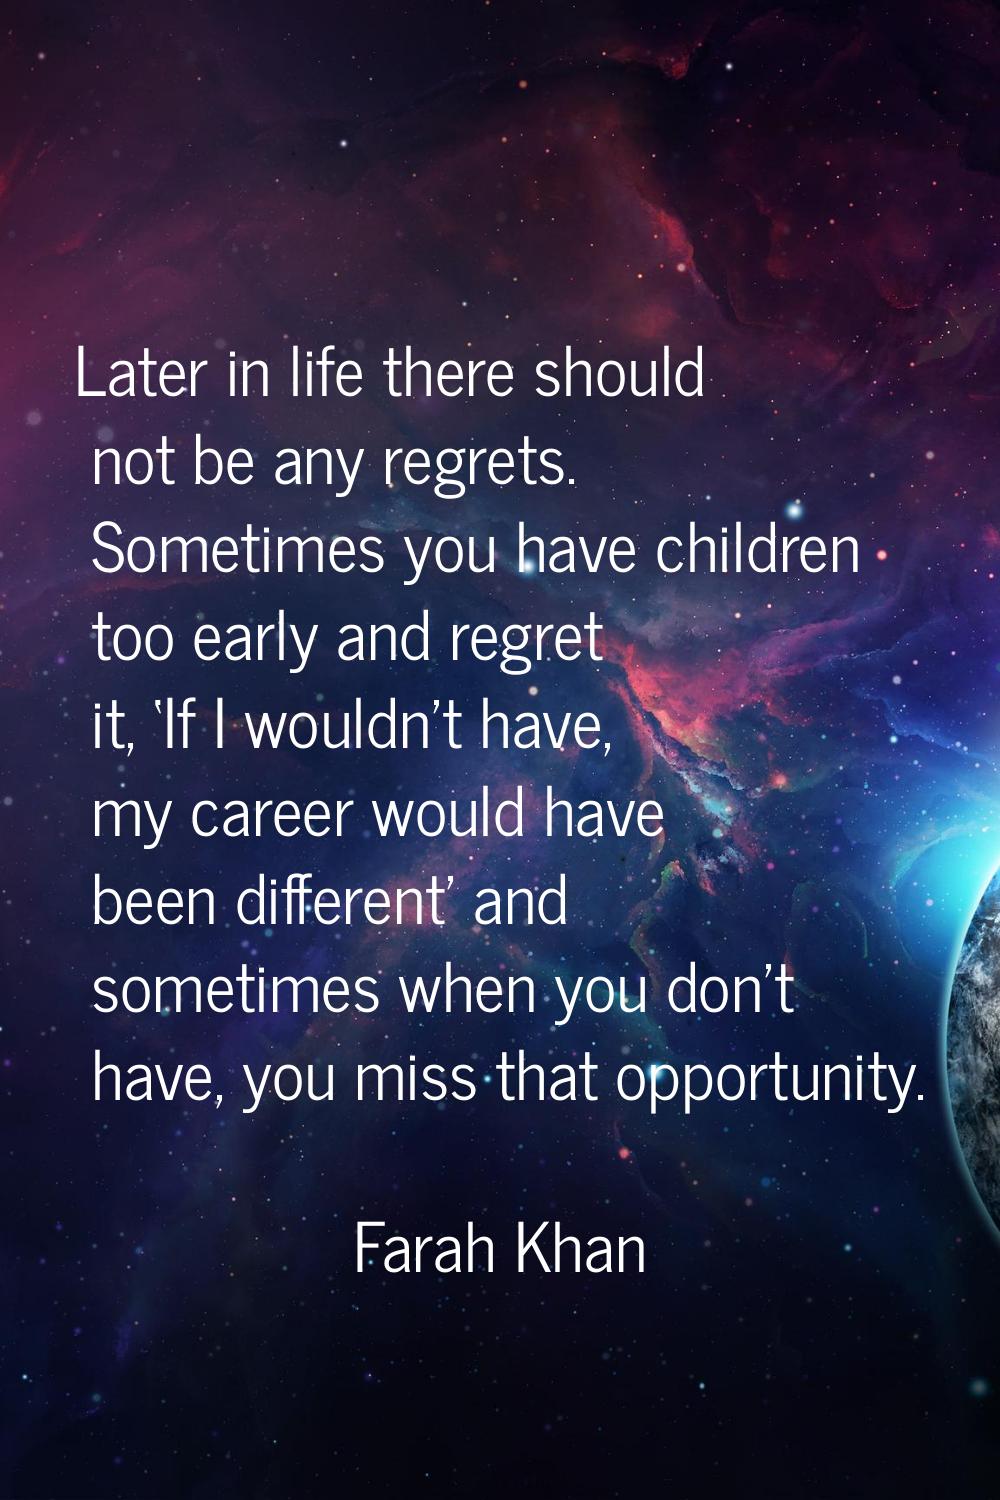 Later in life there should not be any regrets. Sometimes you have children too early and regret it,